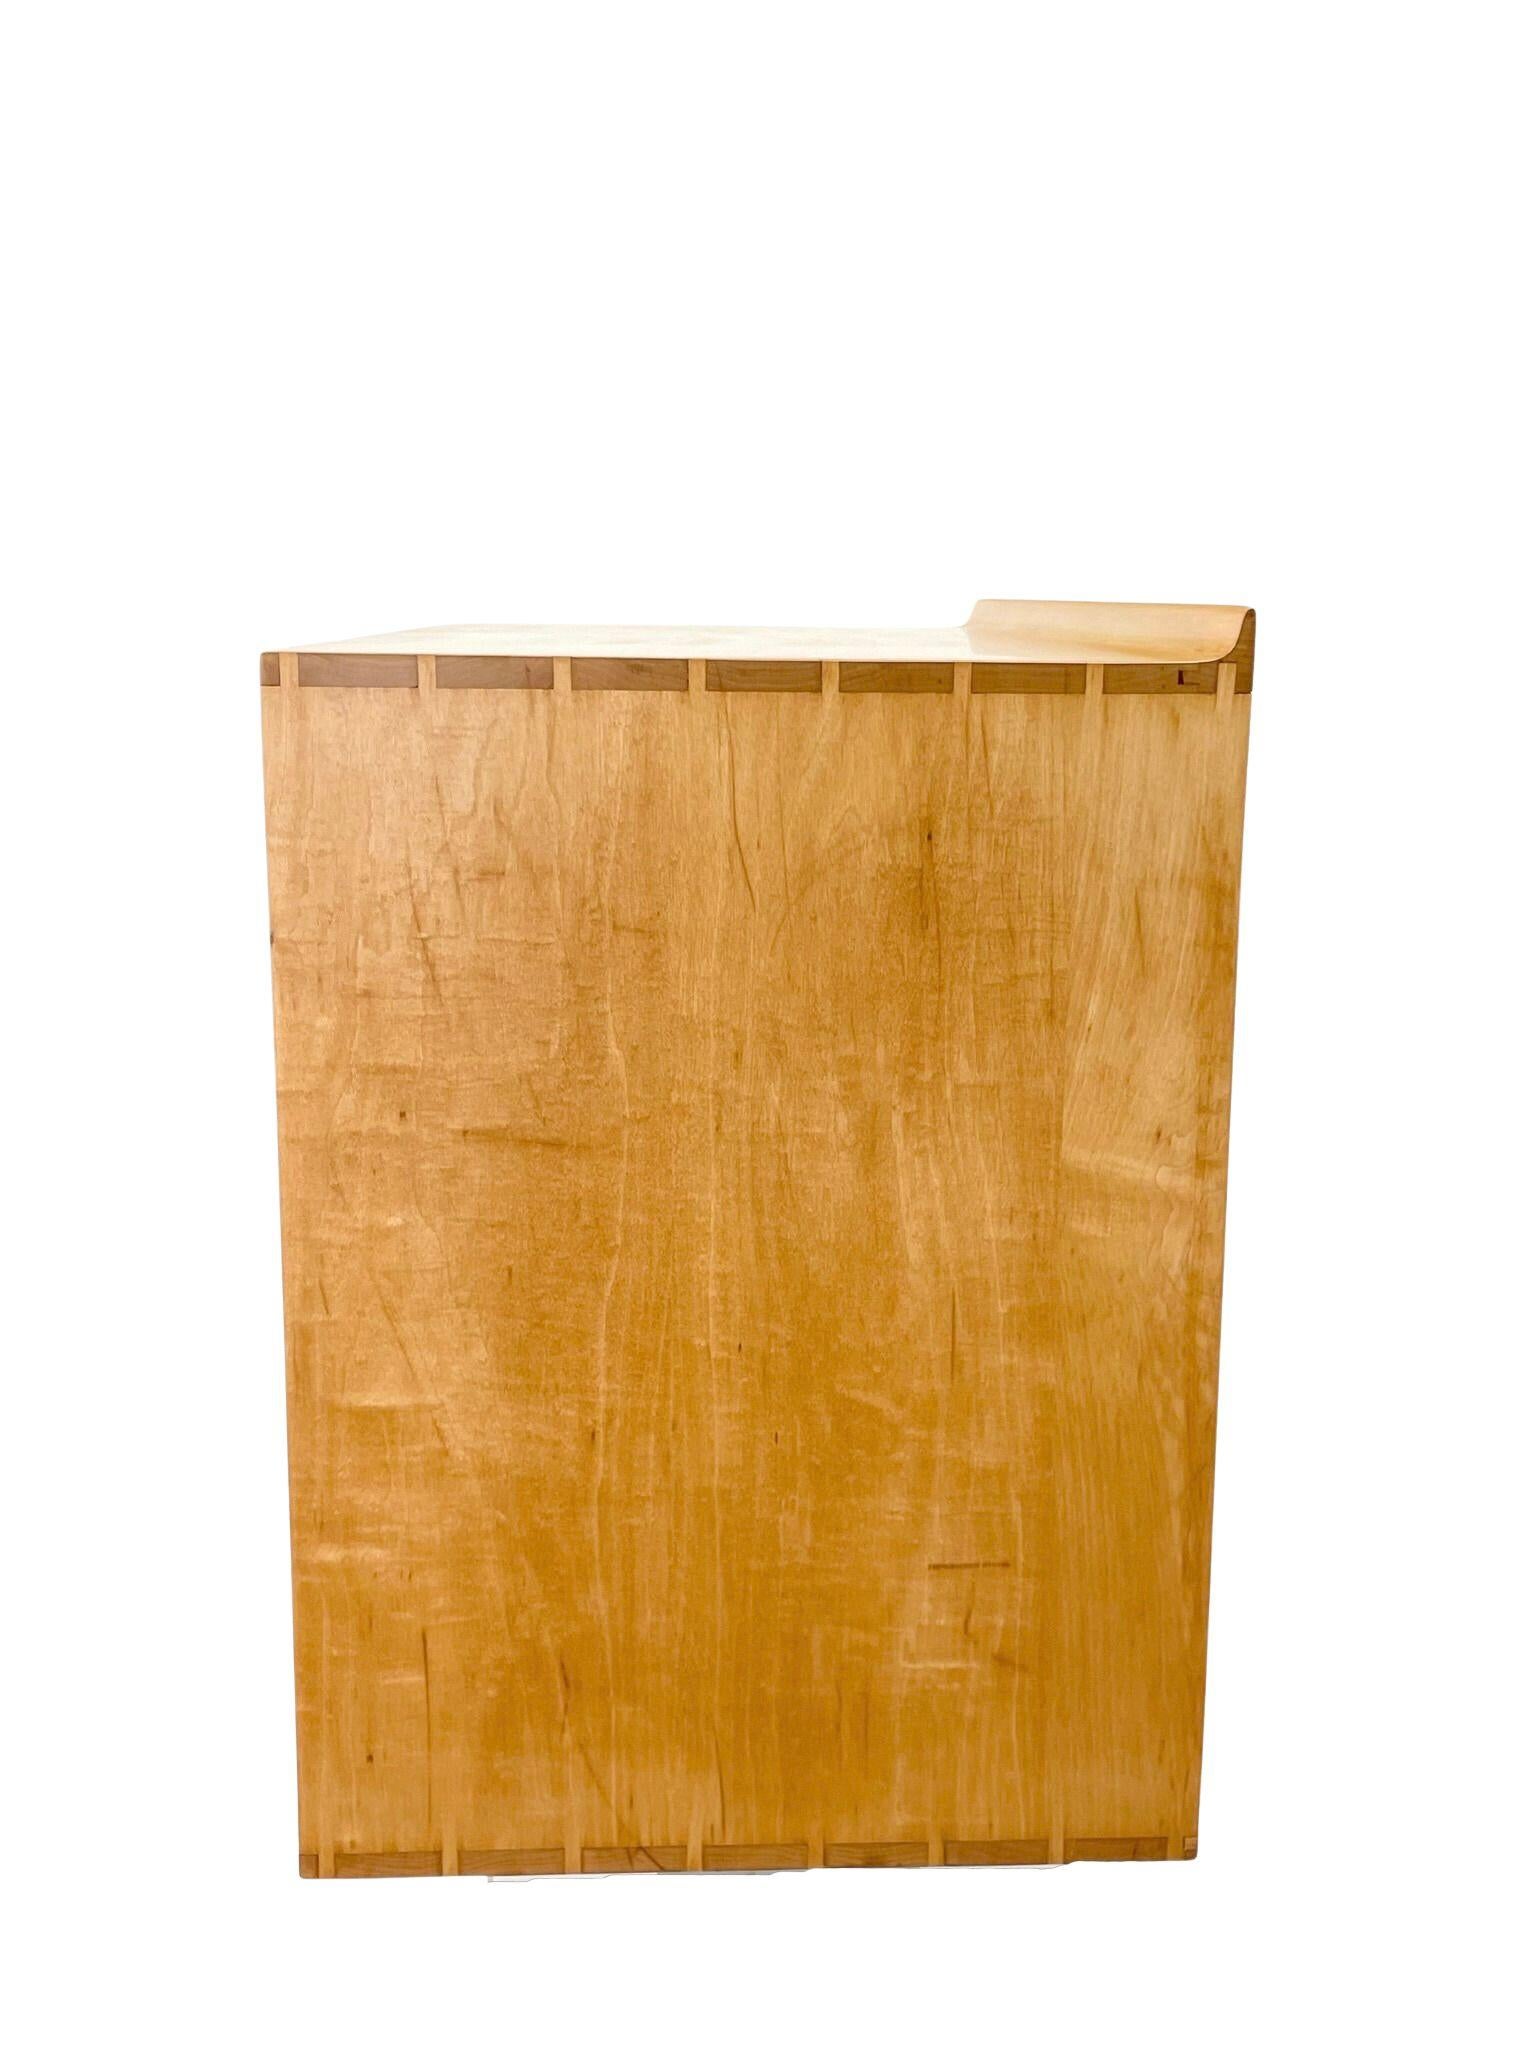 Wall Mounted Cabinet/Console by Finn Juhl for Baker, Teak and Maple 1